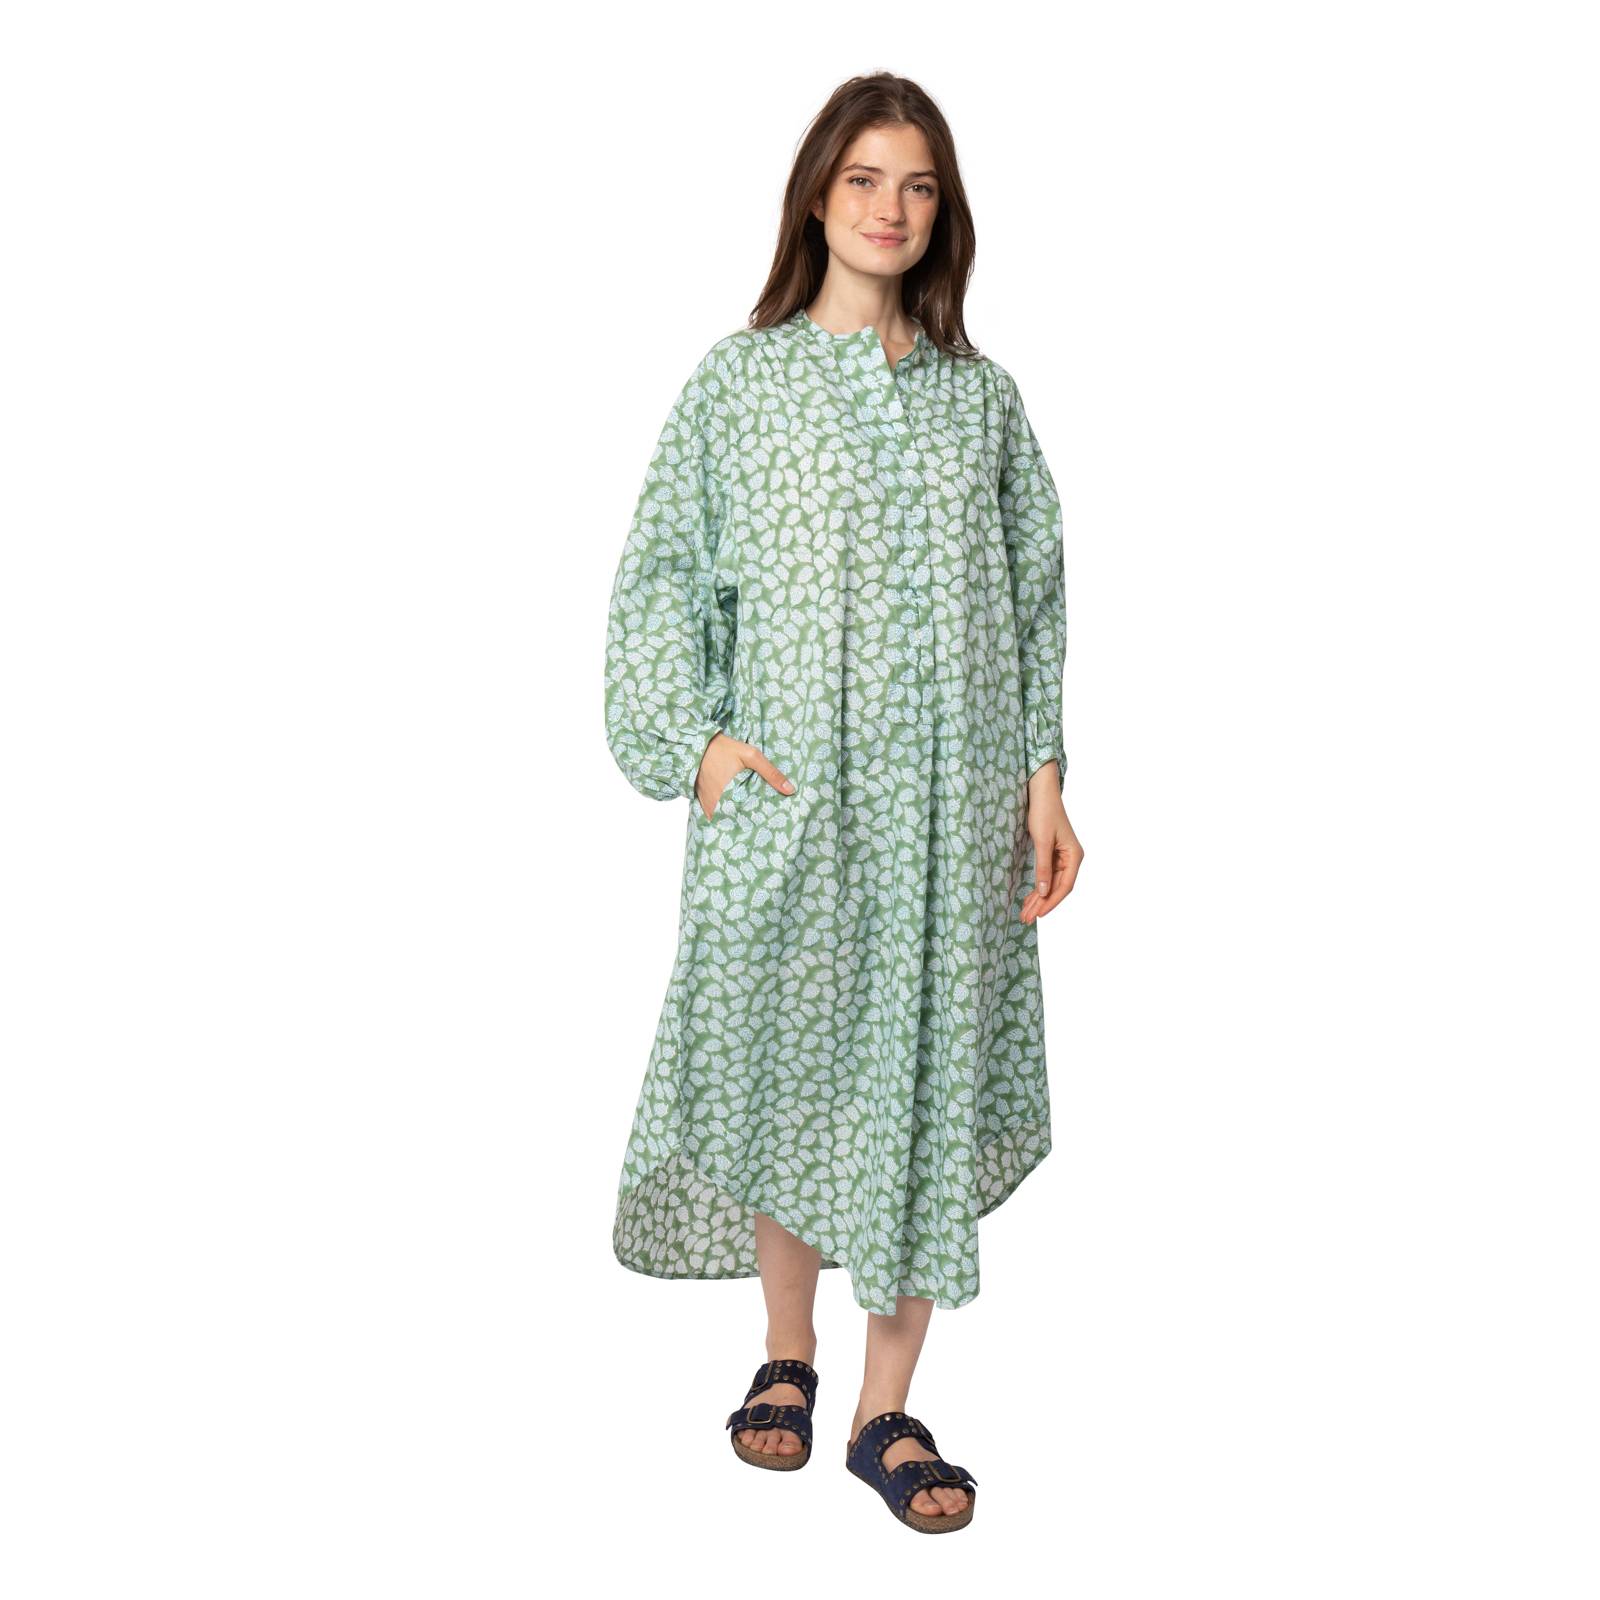 Robes Lilou Dress Leafy 100% Organic Cotton Ethnique VR3504 GREEN